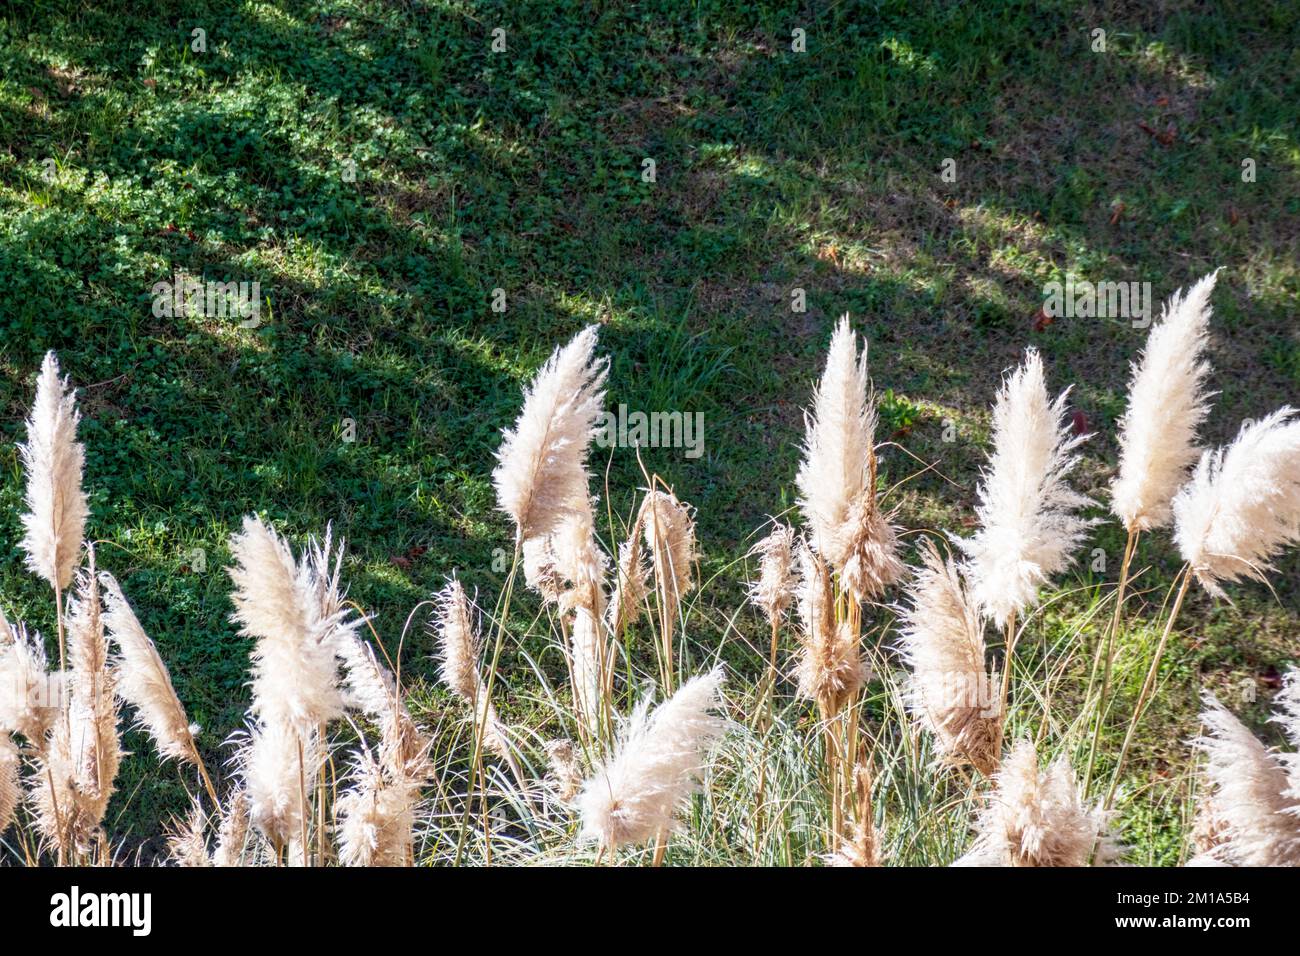 Nature view with white flower spikes on green grass Stock Photo